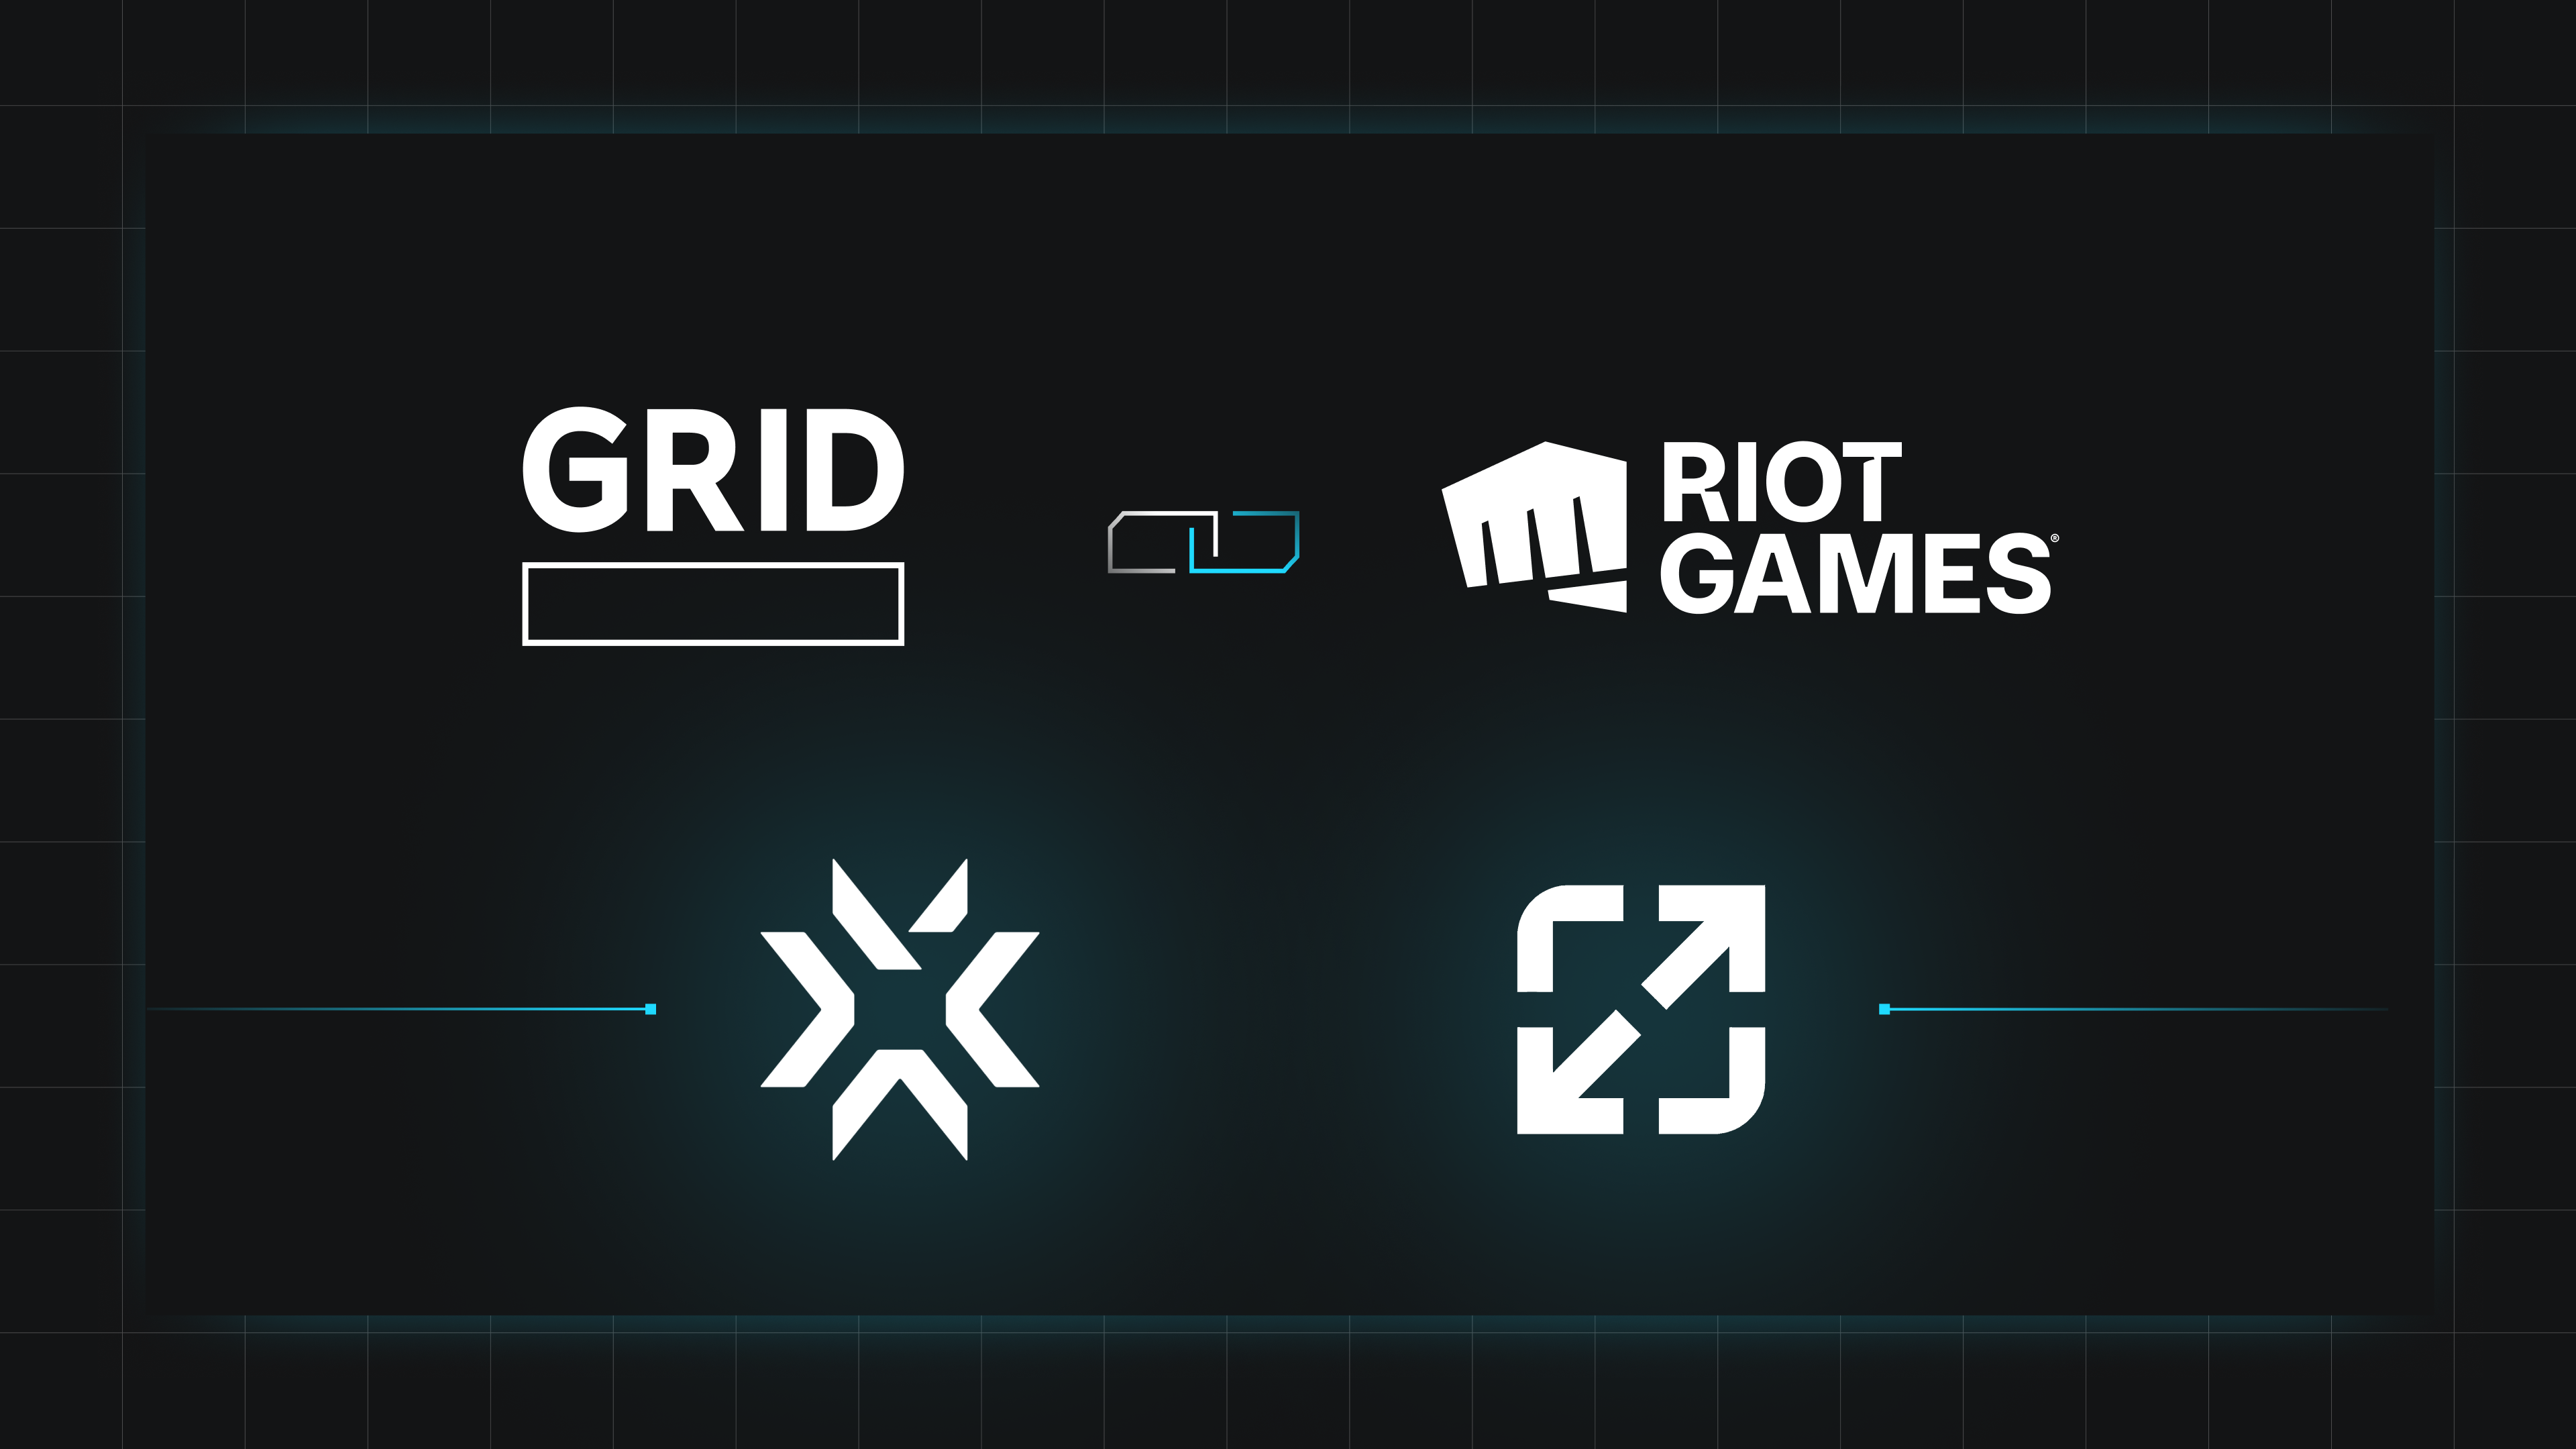 Moritz Maurer and Doug Watson discuss GRID and Riot partnership, data value, and more